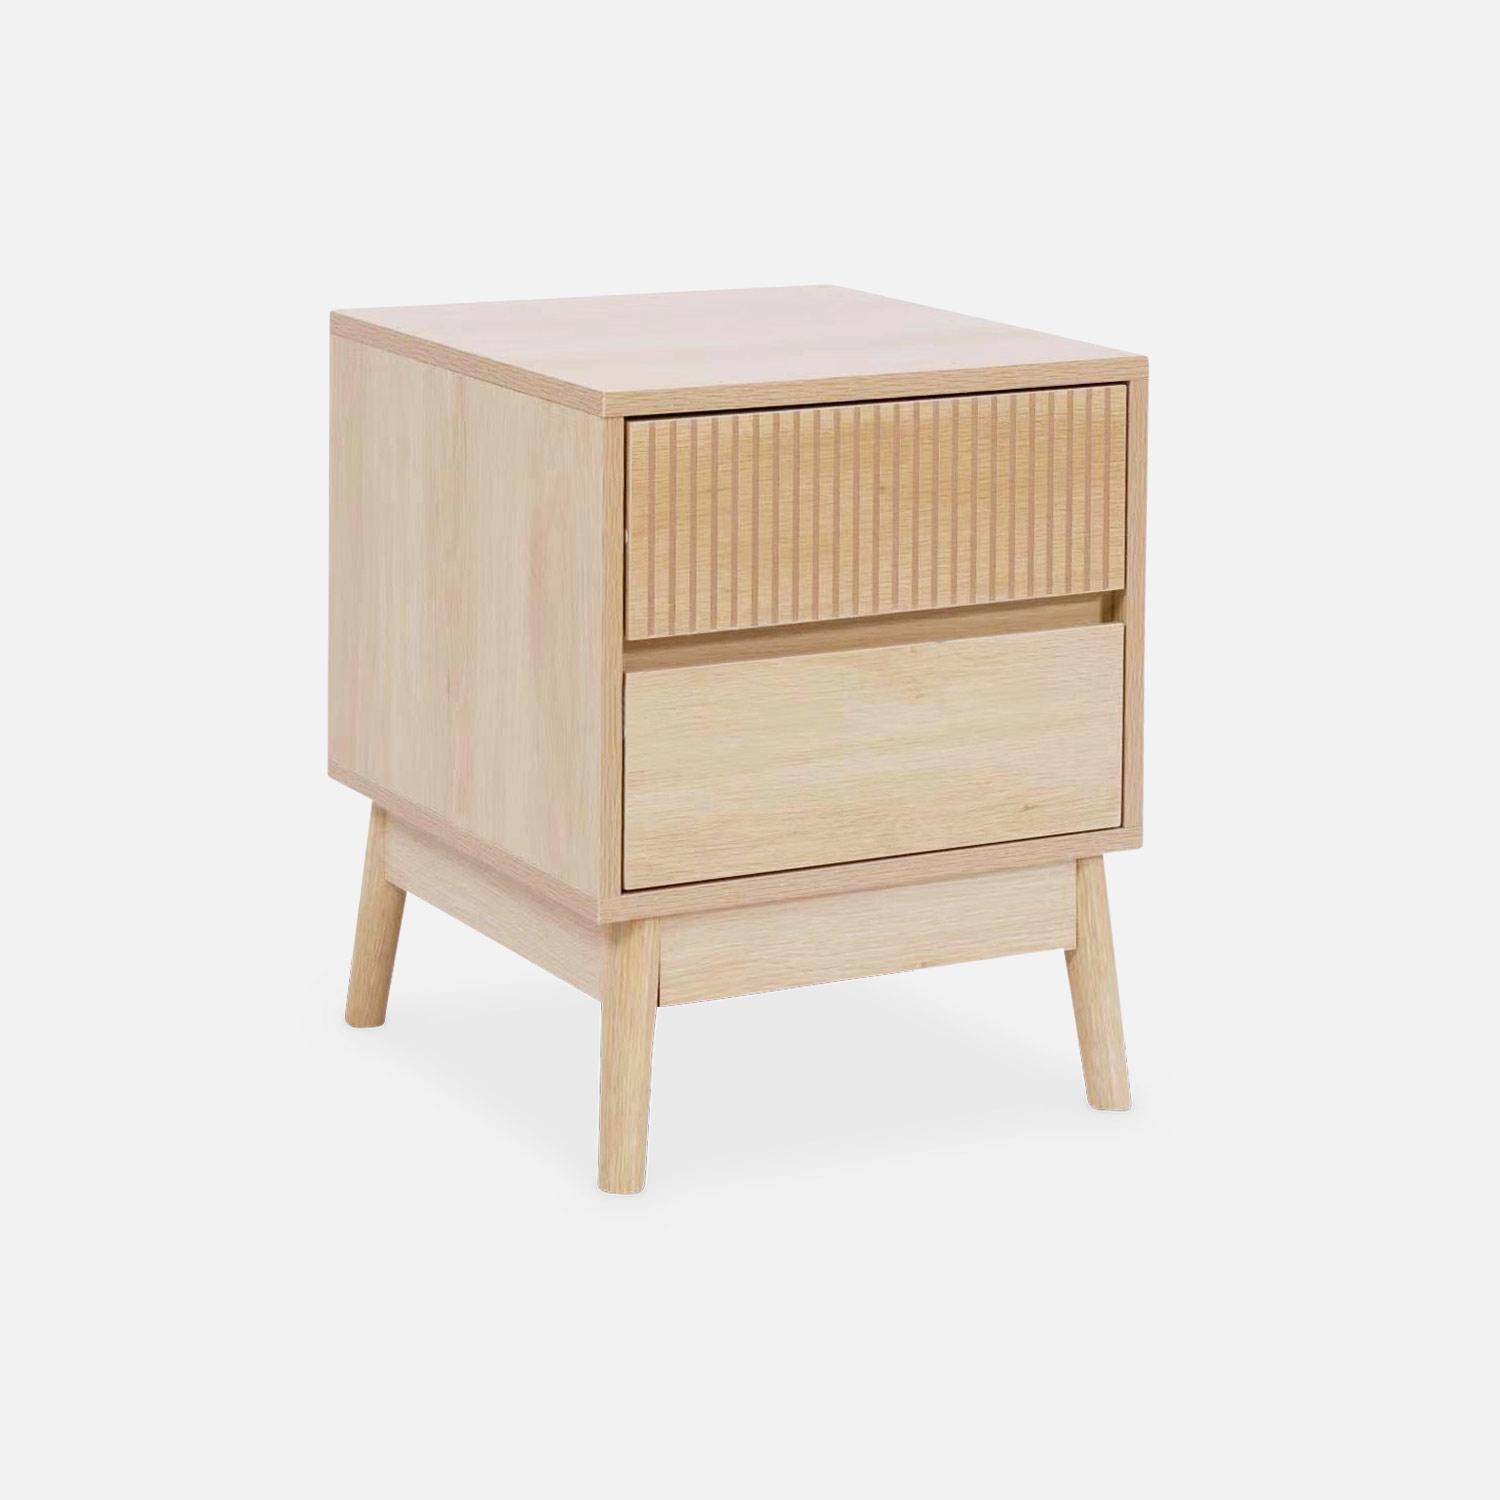 Grooved wooden bedside table with 2 drawers, 40x39x48cm, Linear - Natural Wood colour Photo3